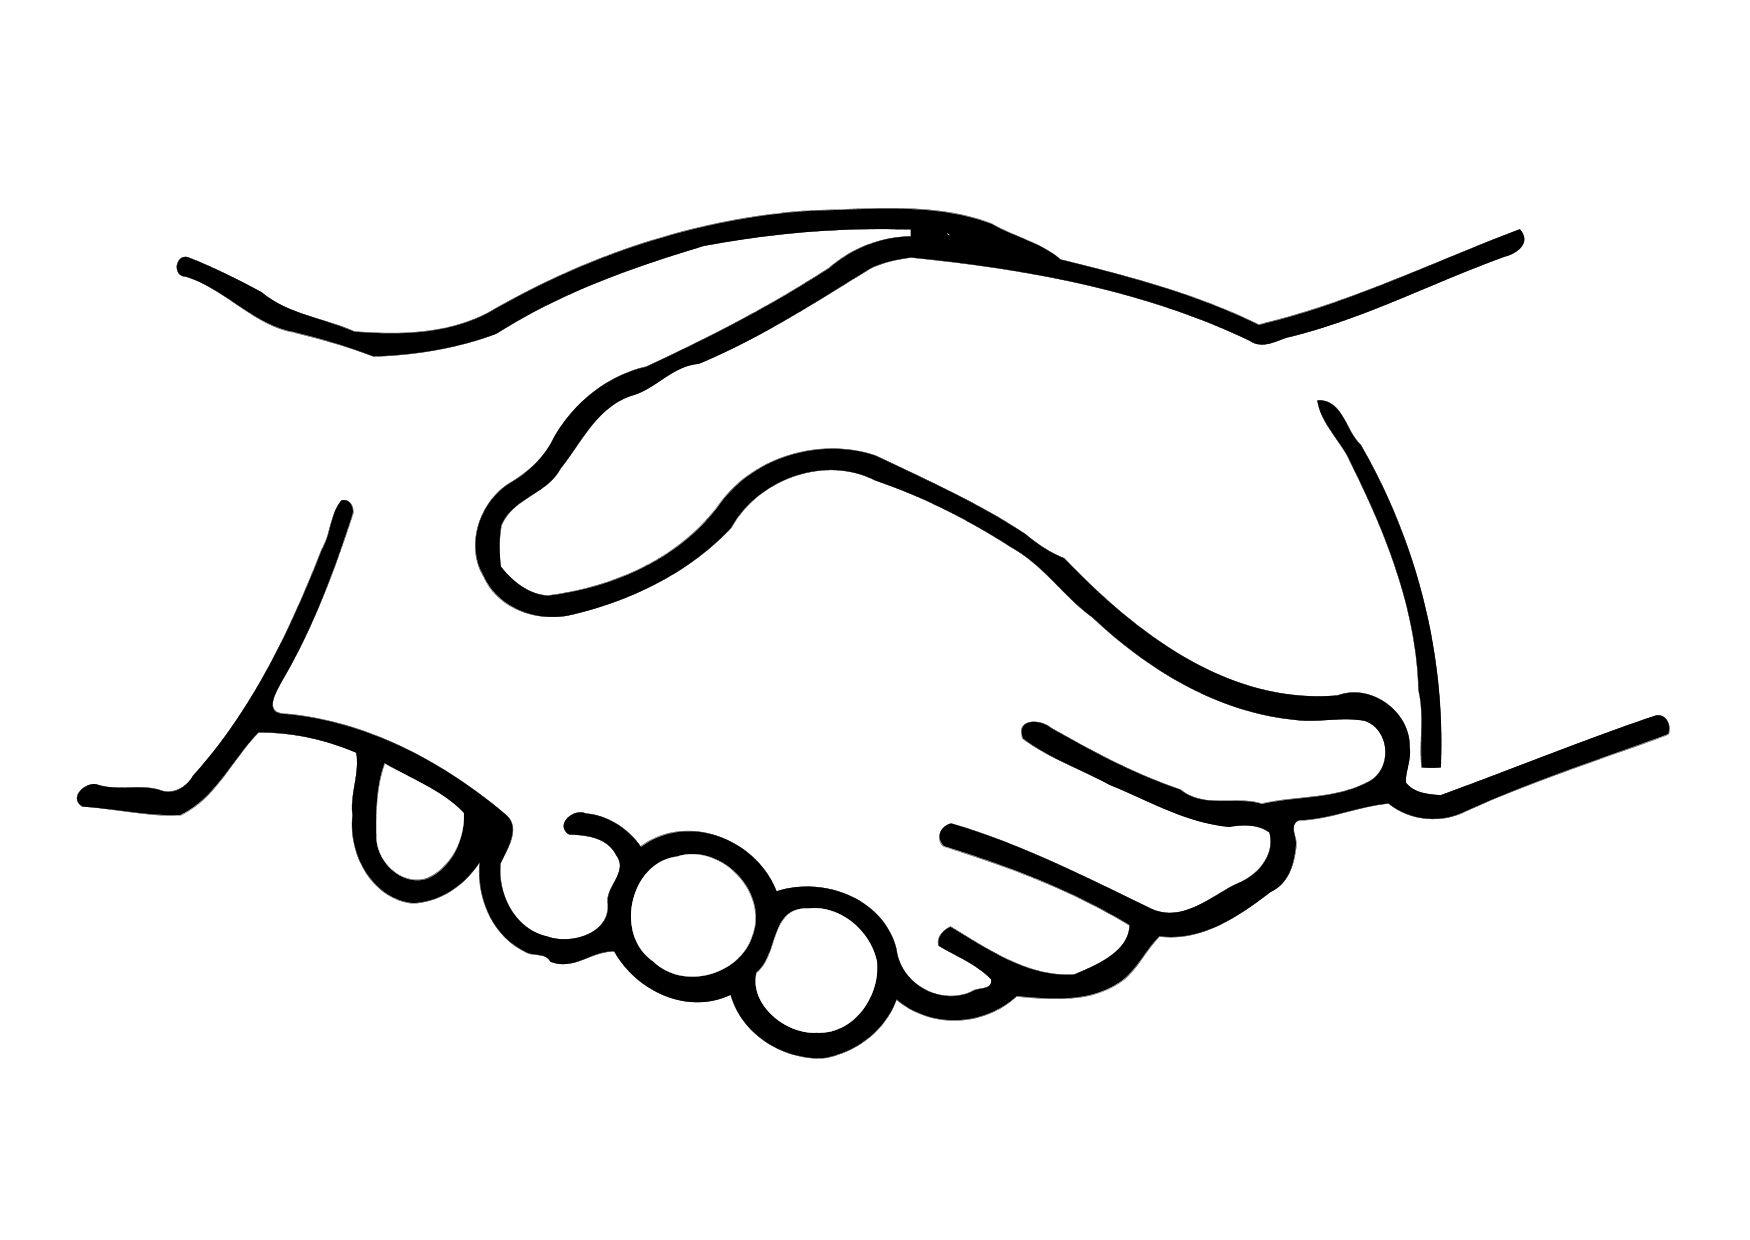 Coloring page shake hands